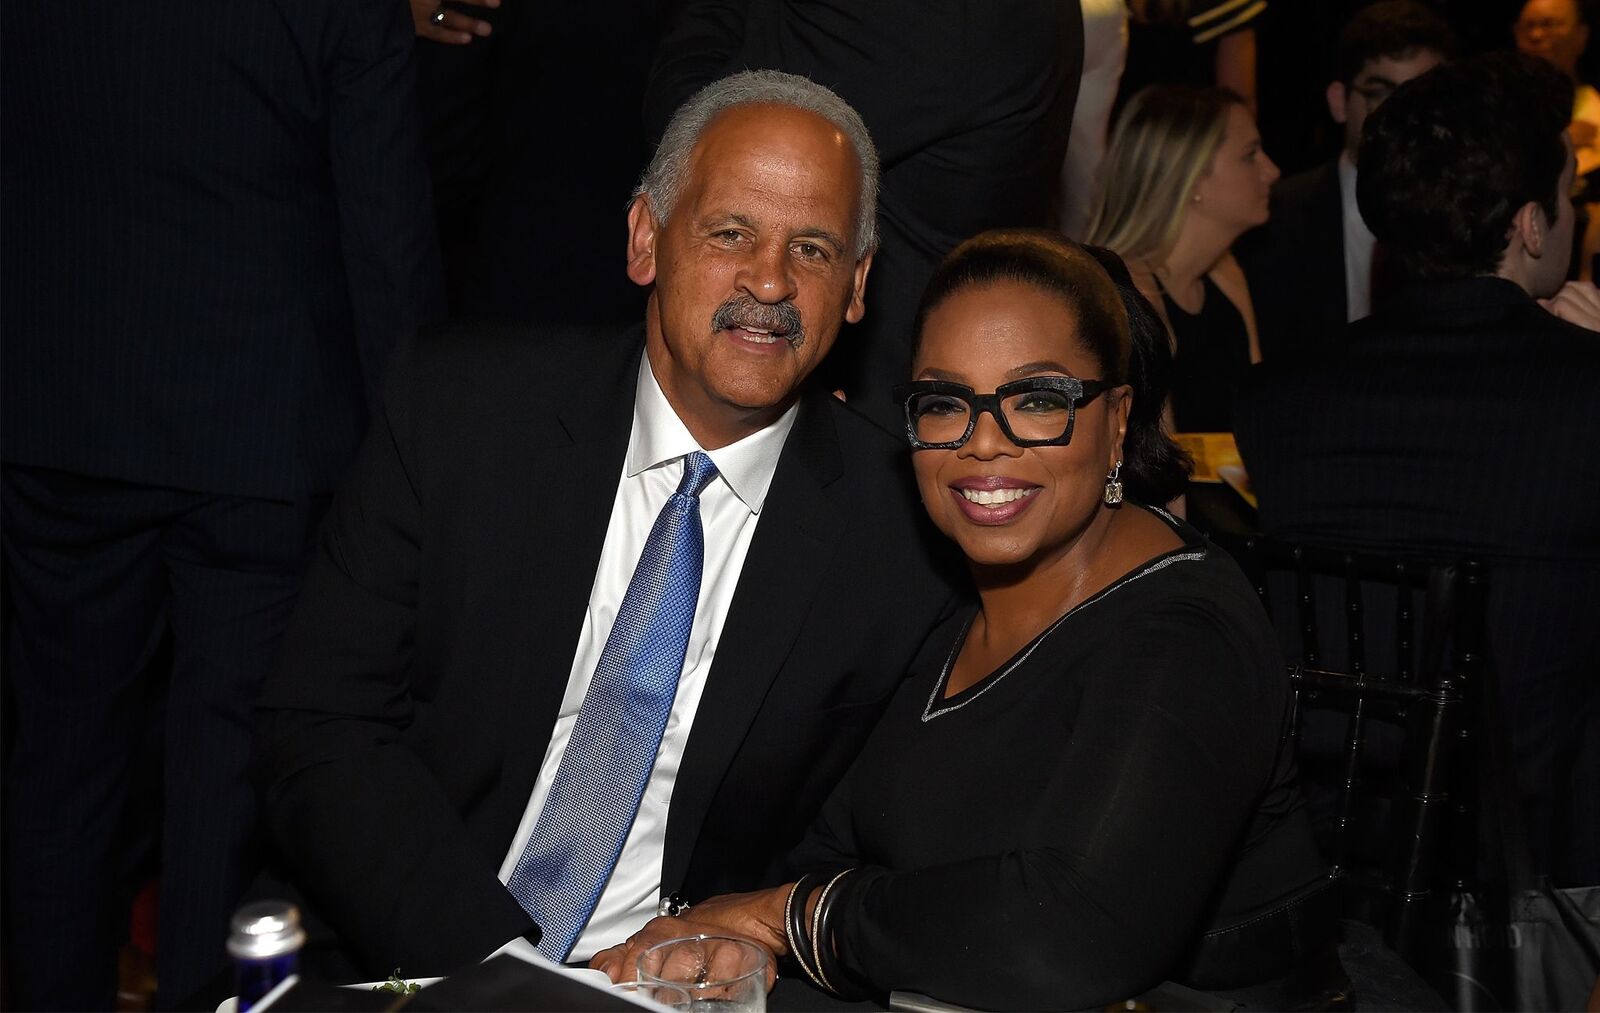 Stedman Graham and Oprah Winfrey at The Robin Hood Foundation's benefit on May 14, 2018, in New York City | Photo: Getty Images